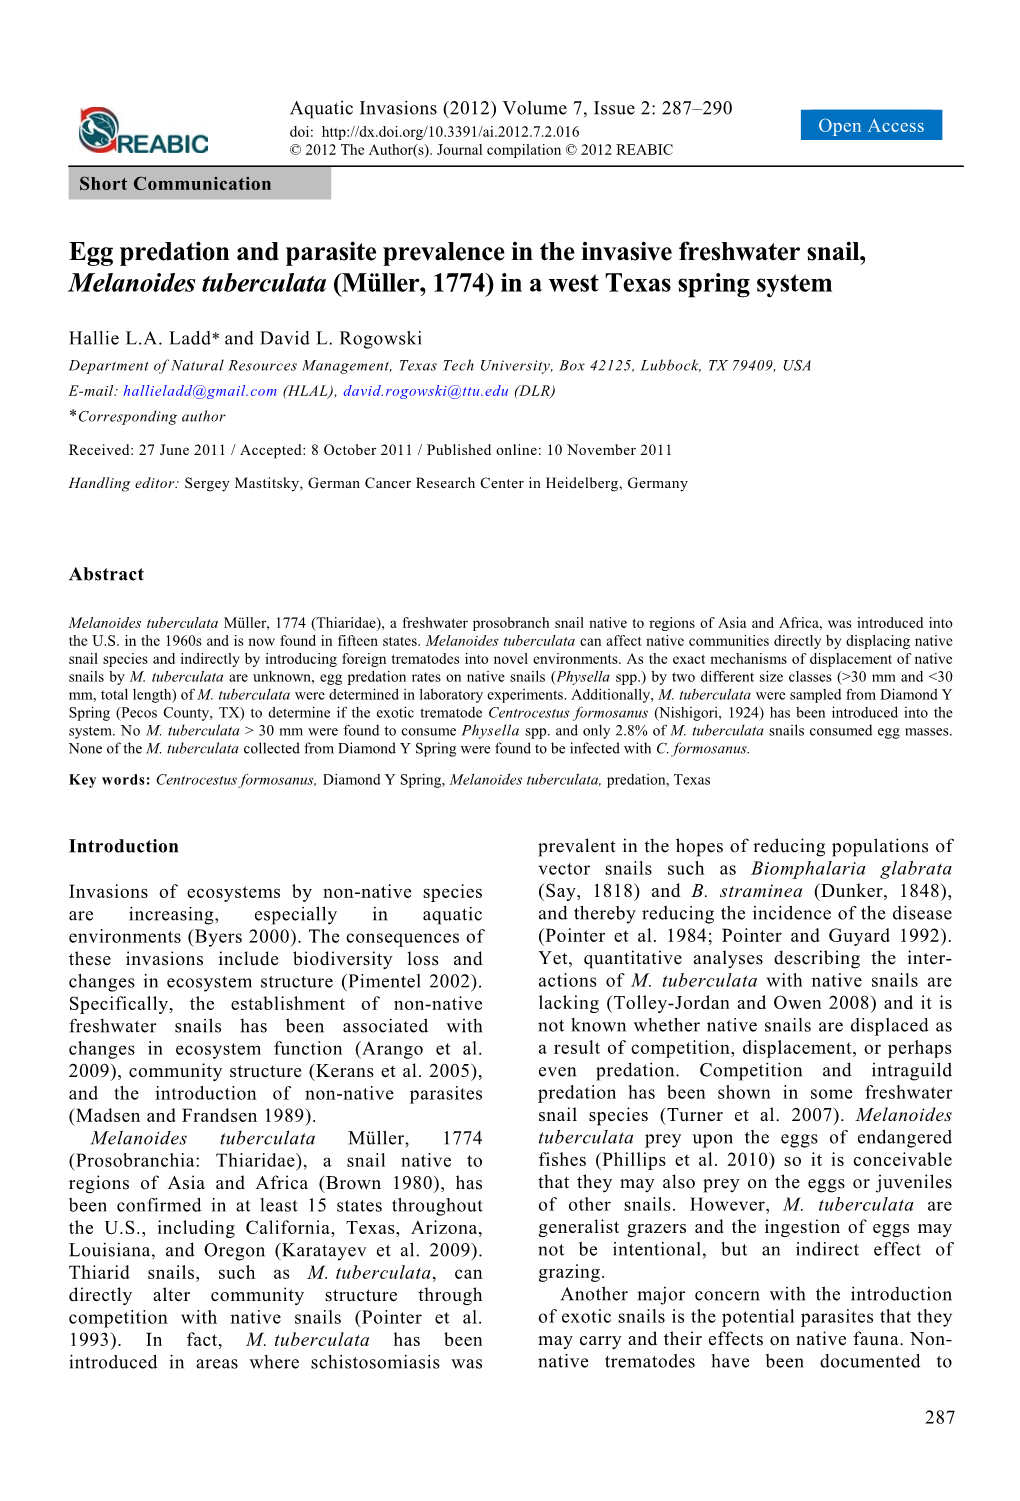 Egg Predation and Parasite Prevalence in the Invasive Freshwater Snail, Melanoides Tuberculata (Müller, 1774) in a West Texas Spring System